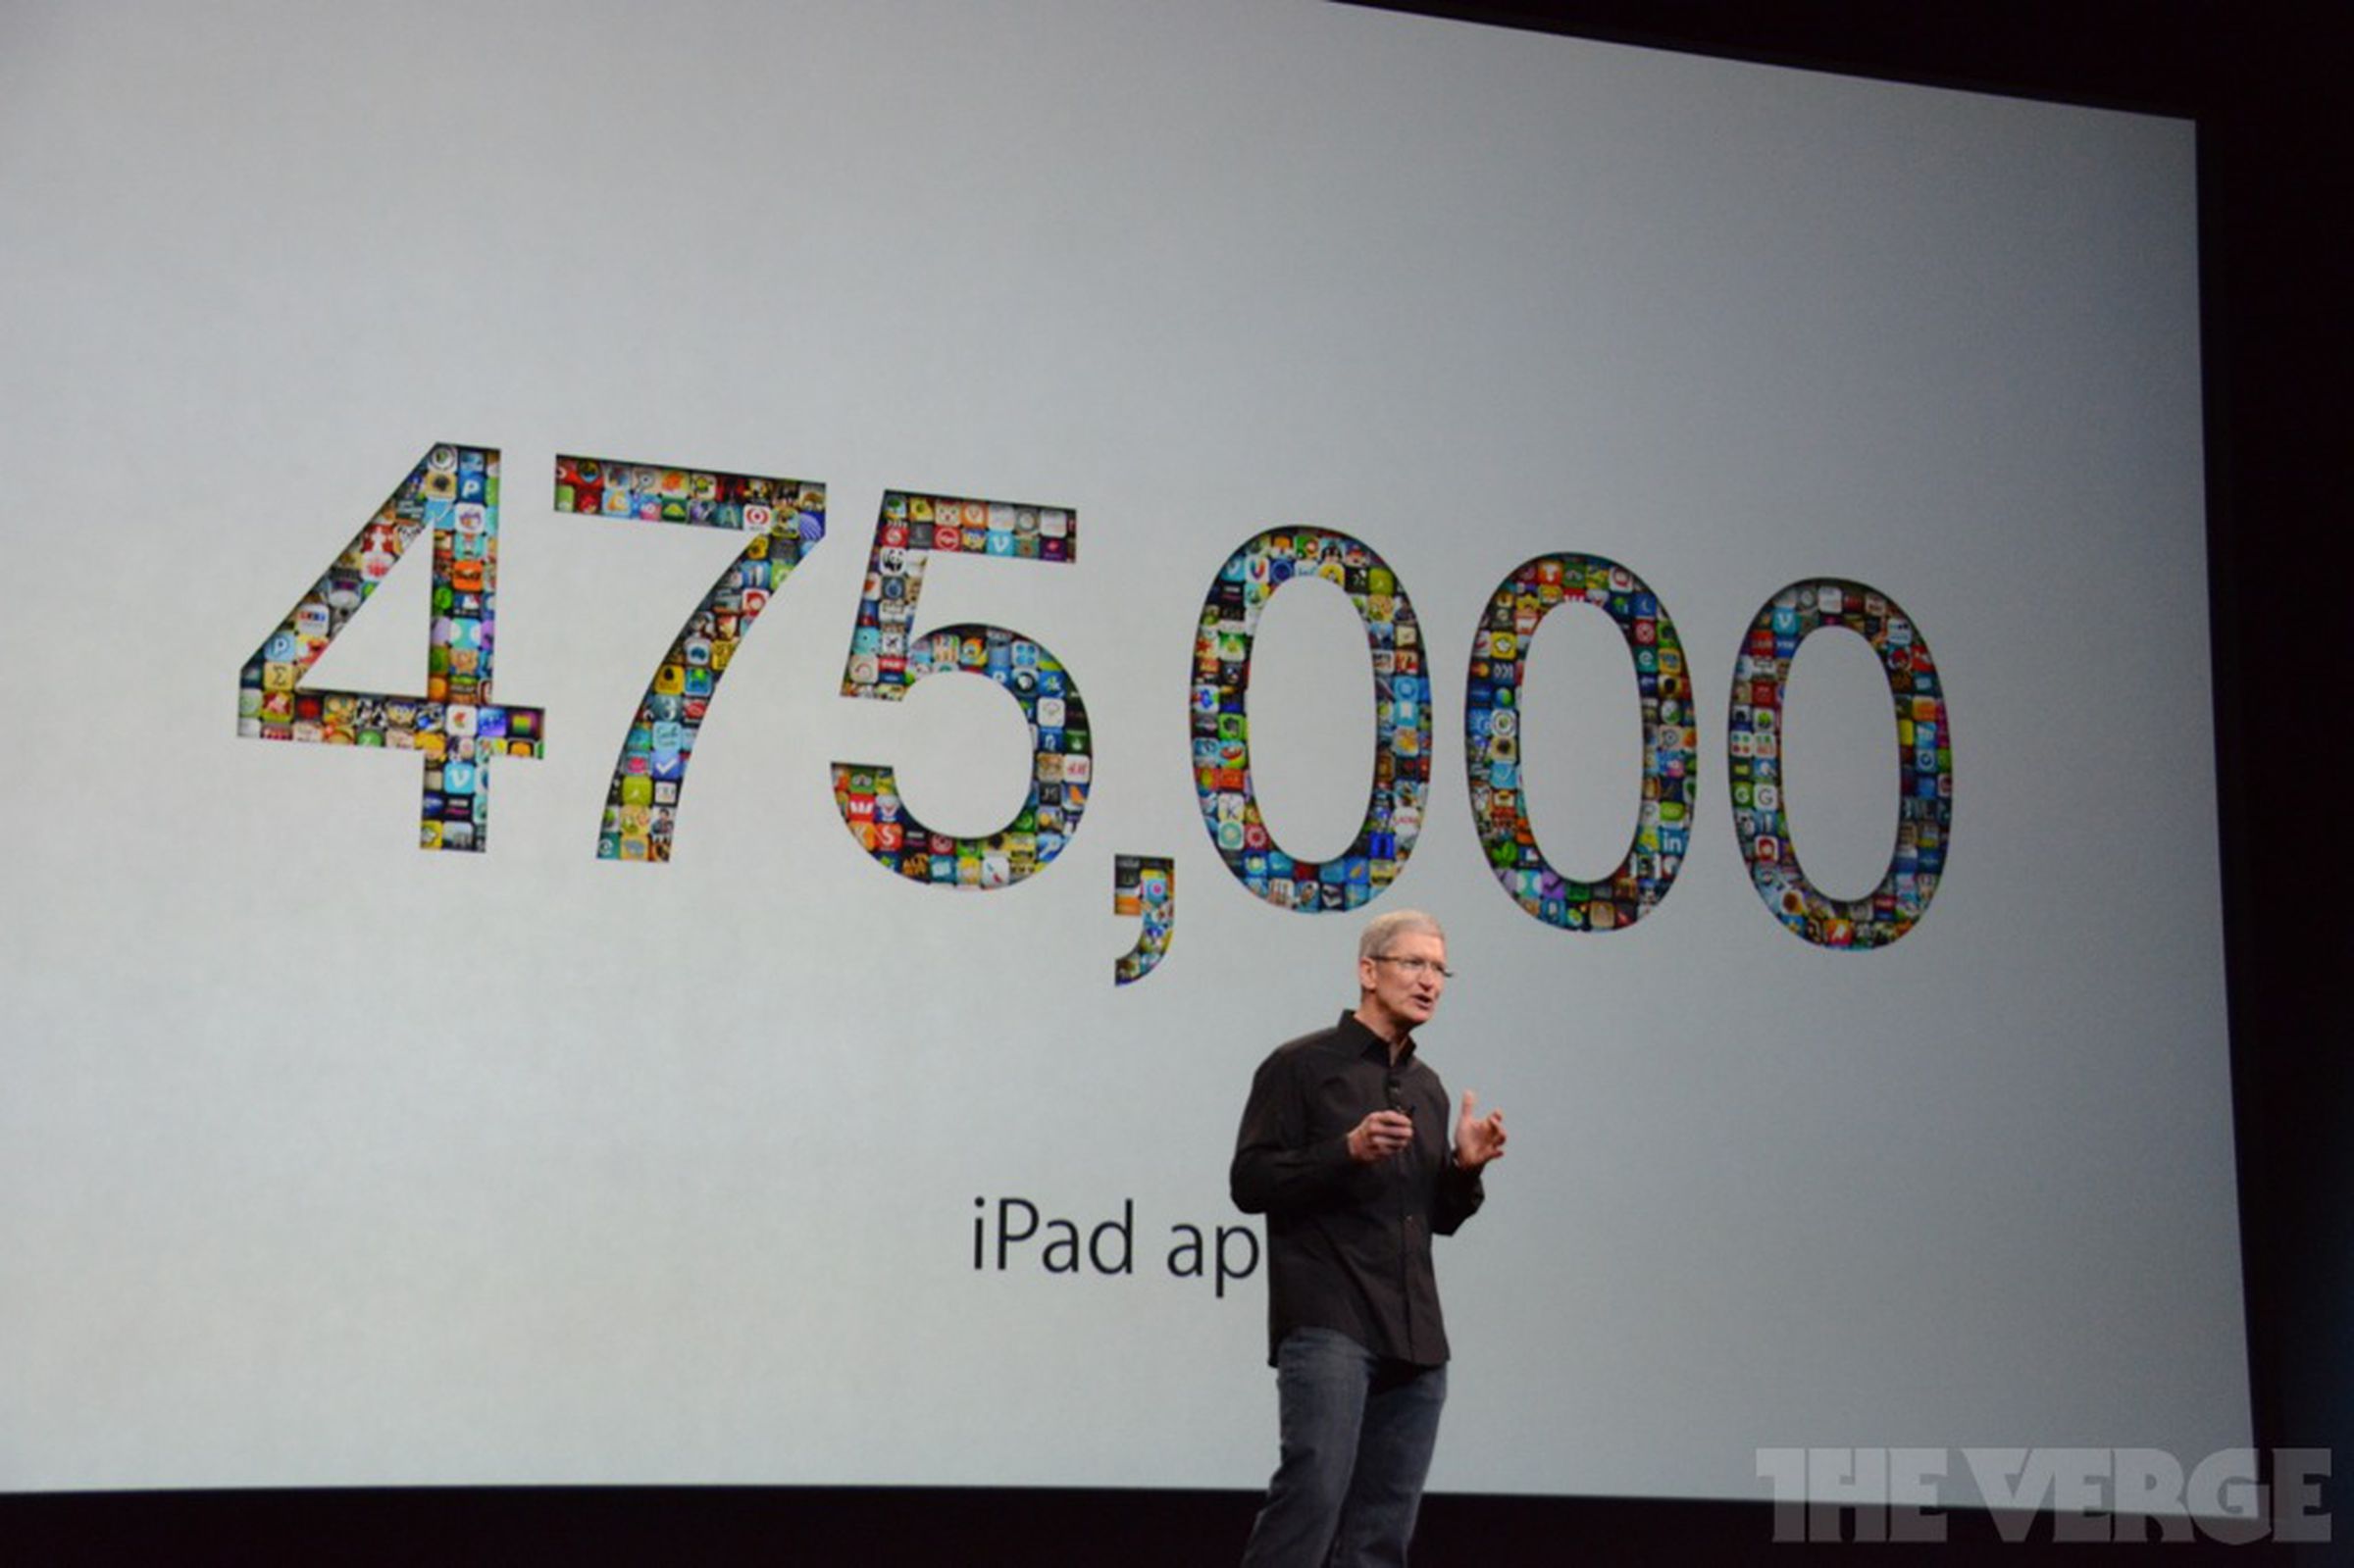 Apple Sales and Stats - October 2013 